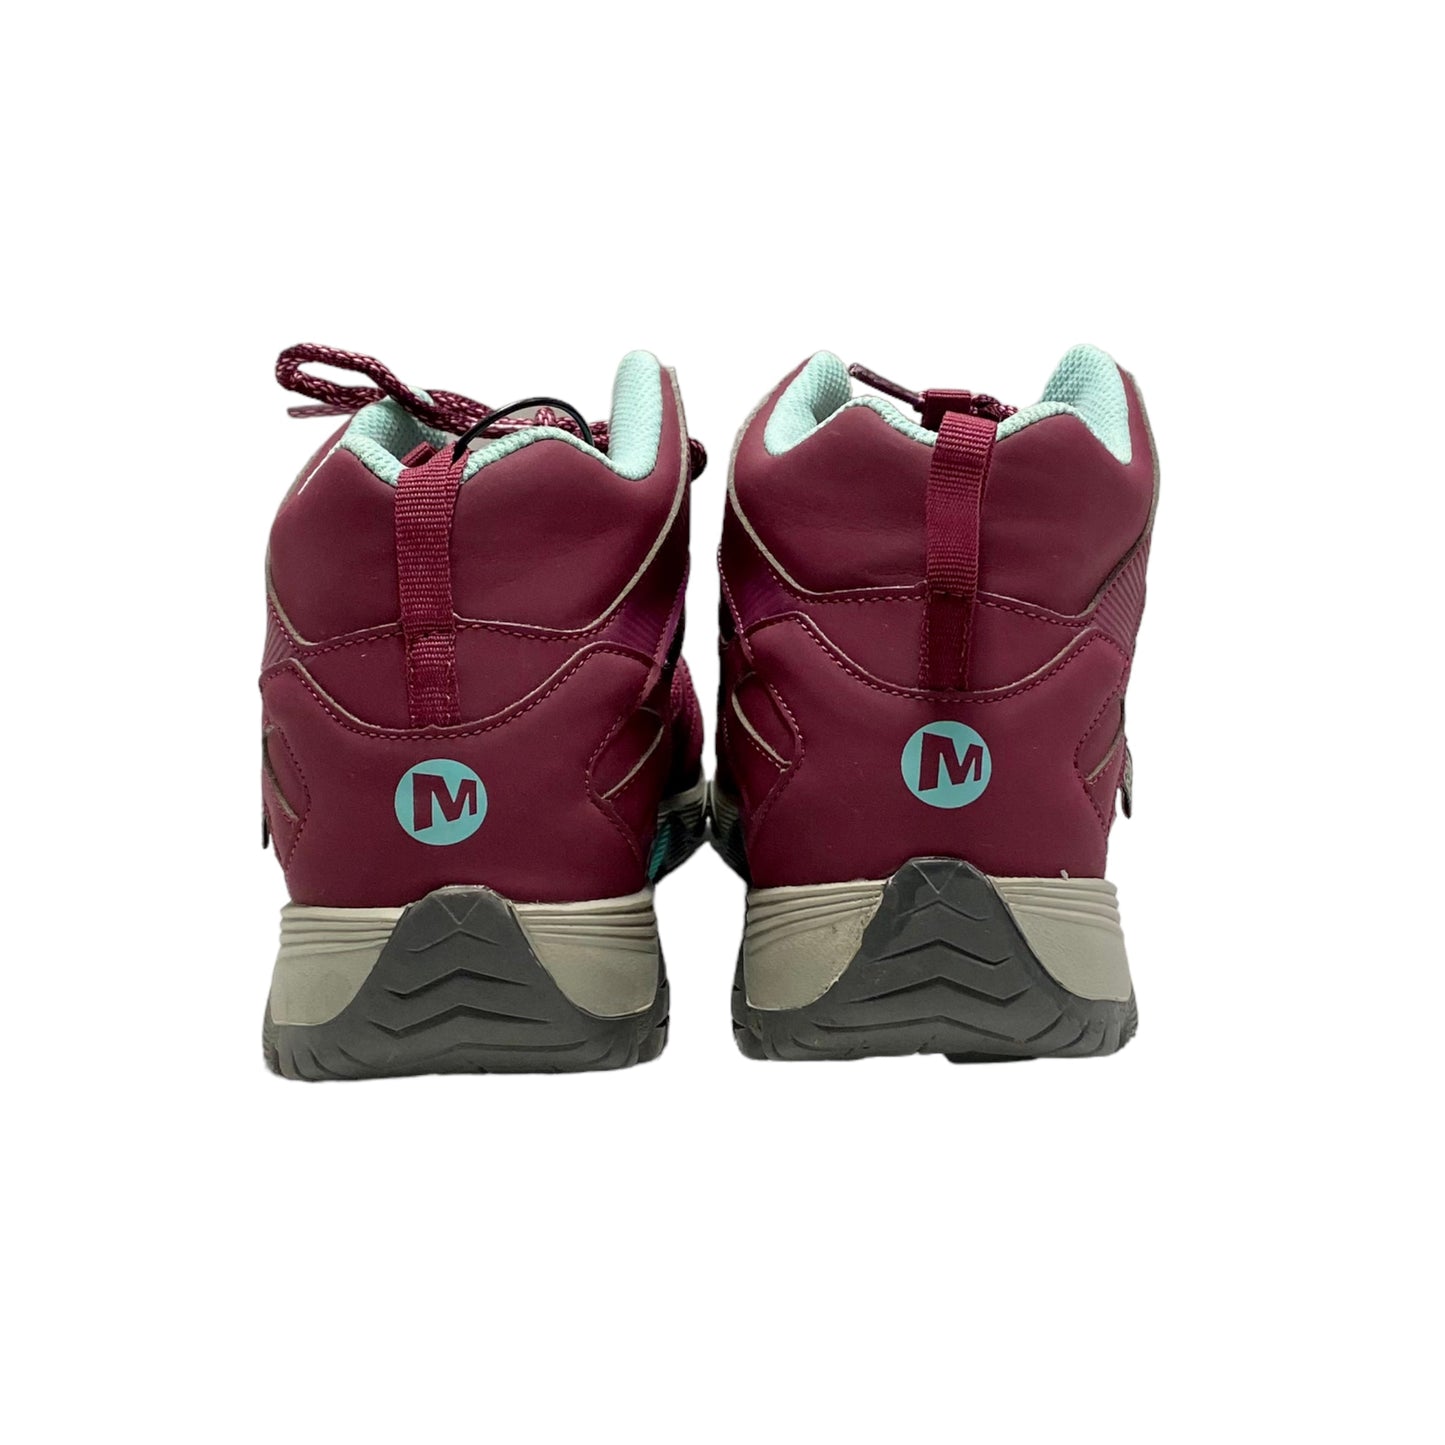 Boots Hiking By Merrell  Size: 7